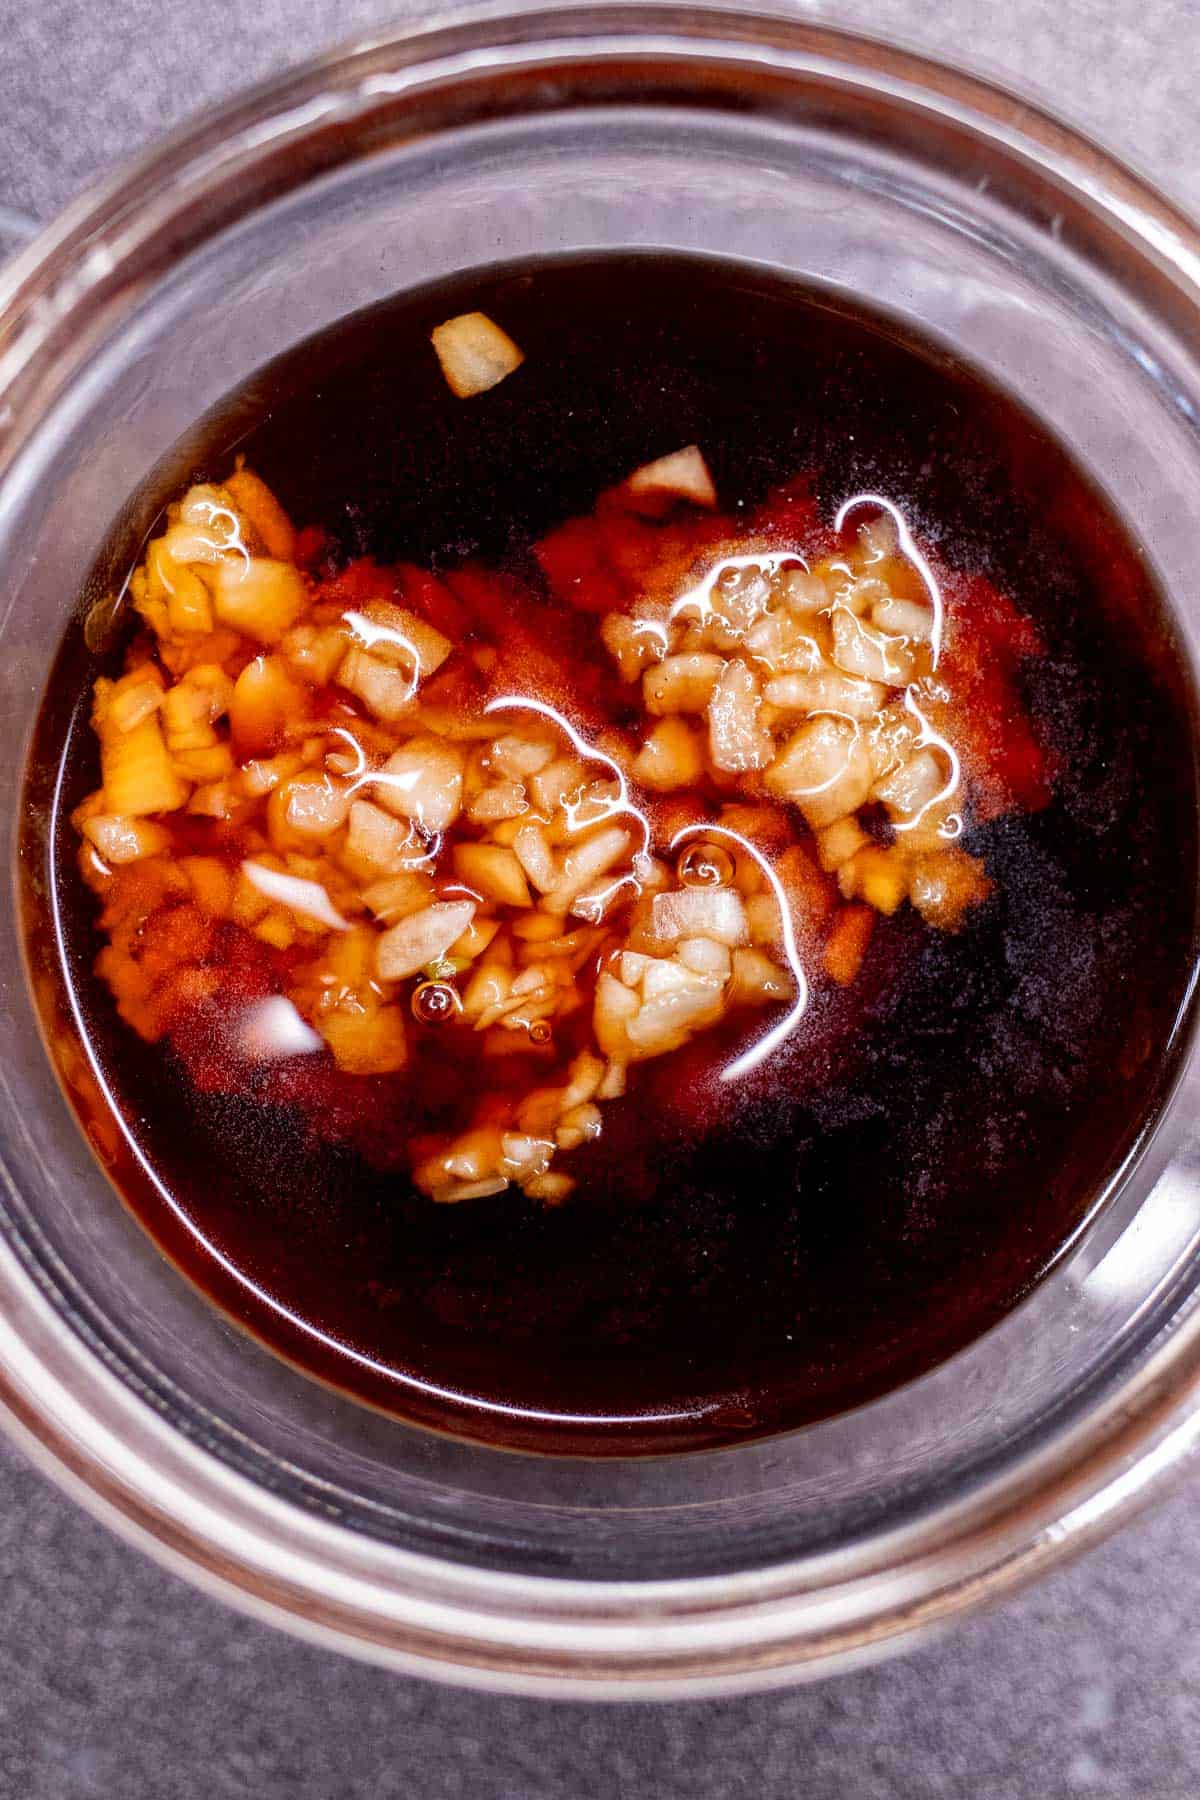 Minced garlic resting in small bowl of Chinese black vinegar.